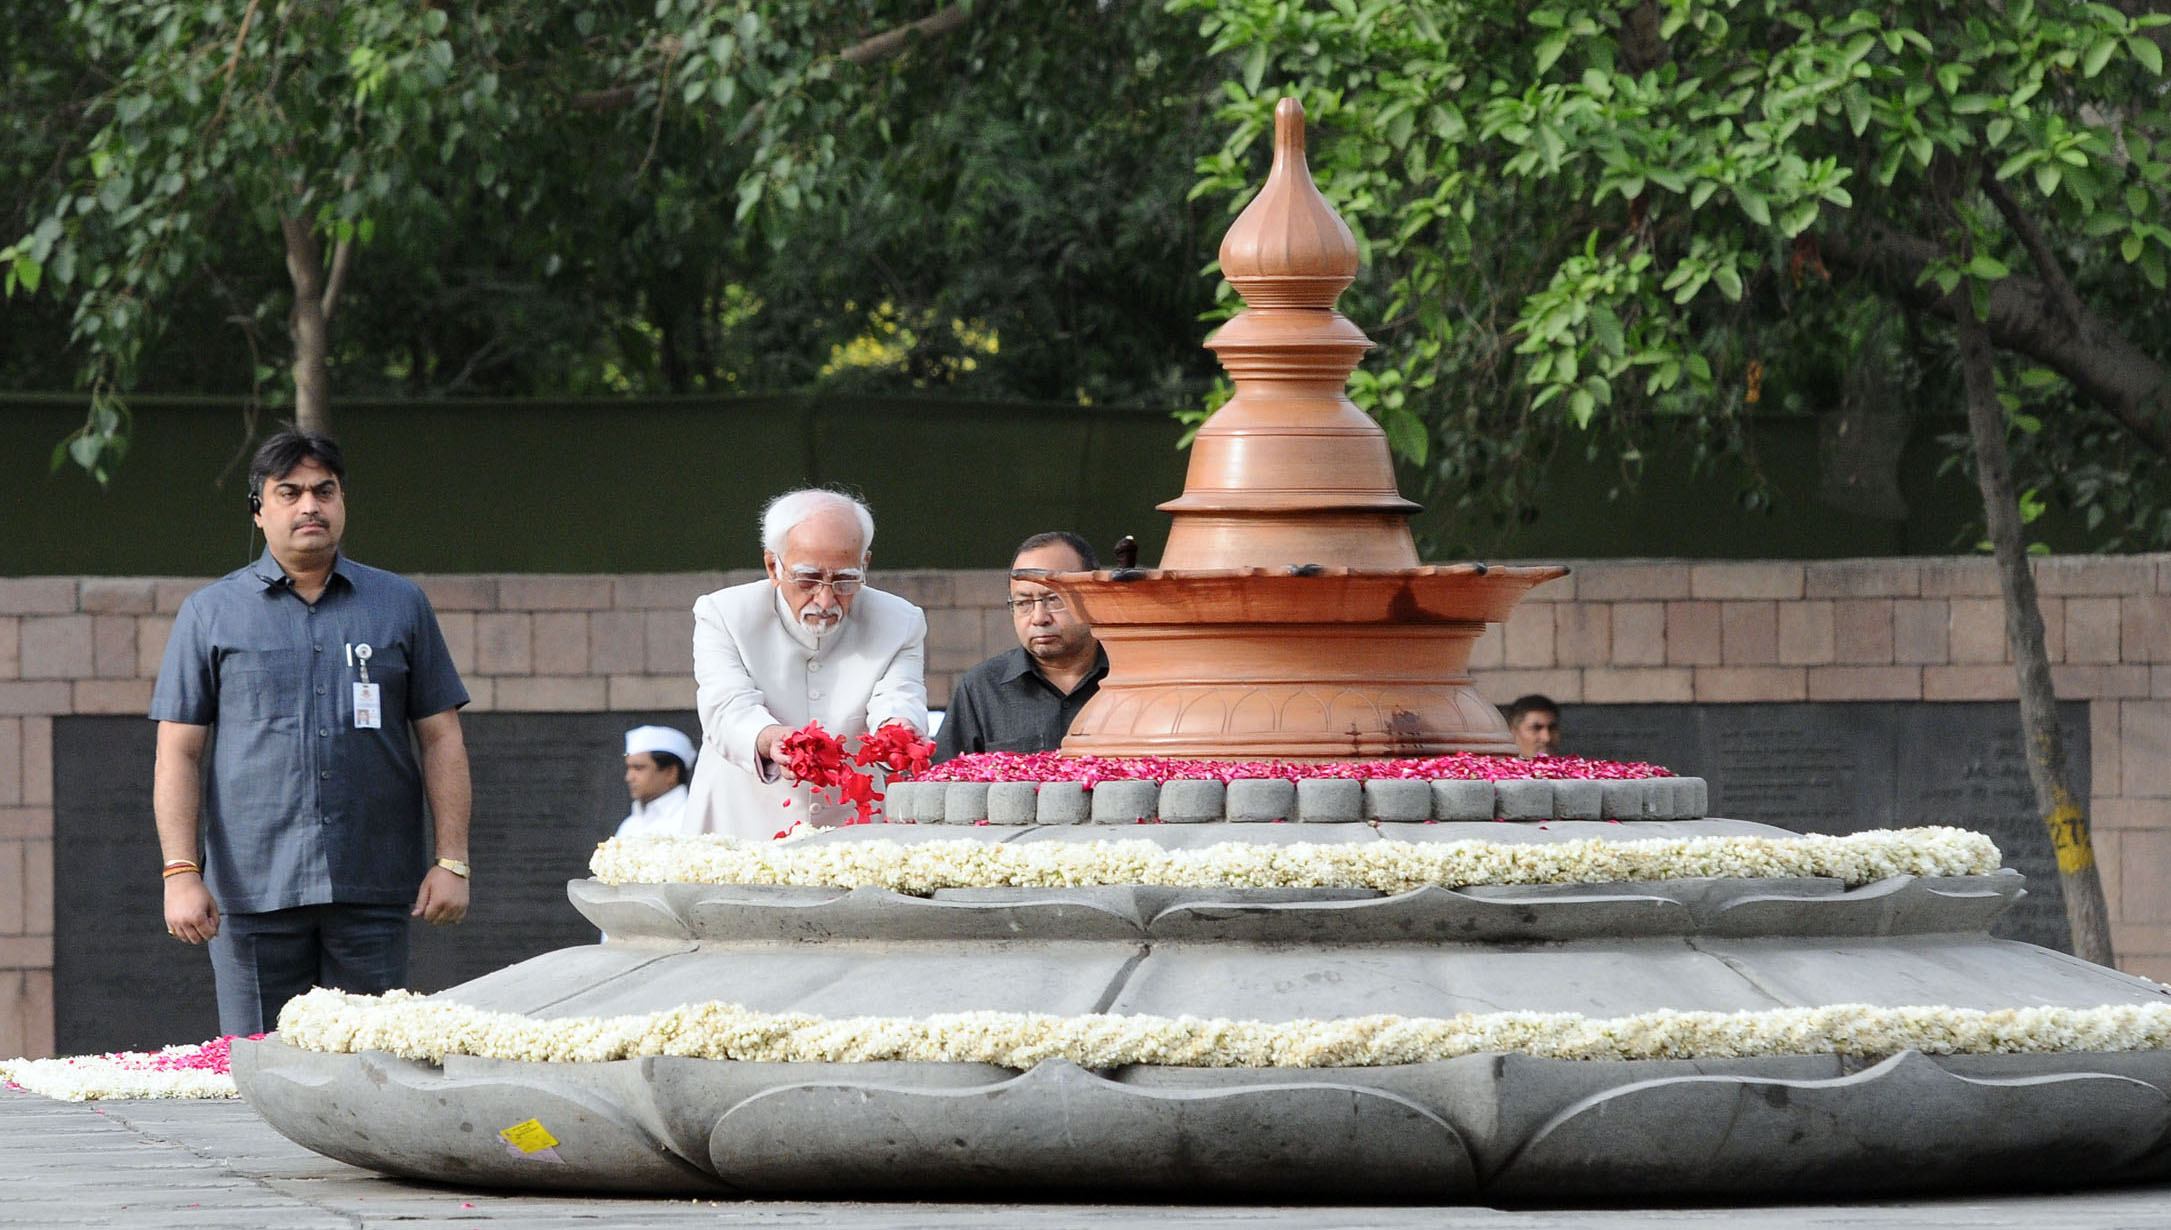 The Vice President, Shri M. Hamid Ansari paying floral tributes at the Samadhi of the former Prime Minister, late Shri Rajiv Gandhi, on his 26th Anniversary of Martyrdom, at Vir Bhoomi, in New Delhi on May 21, 2017.